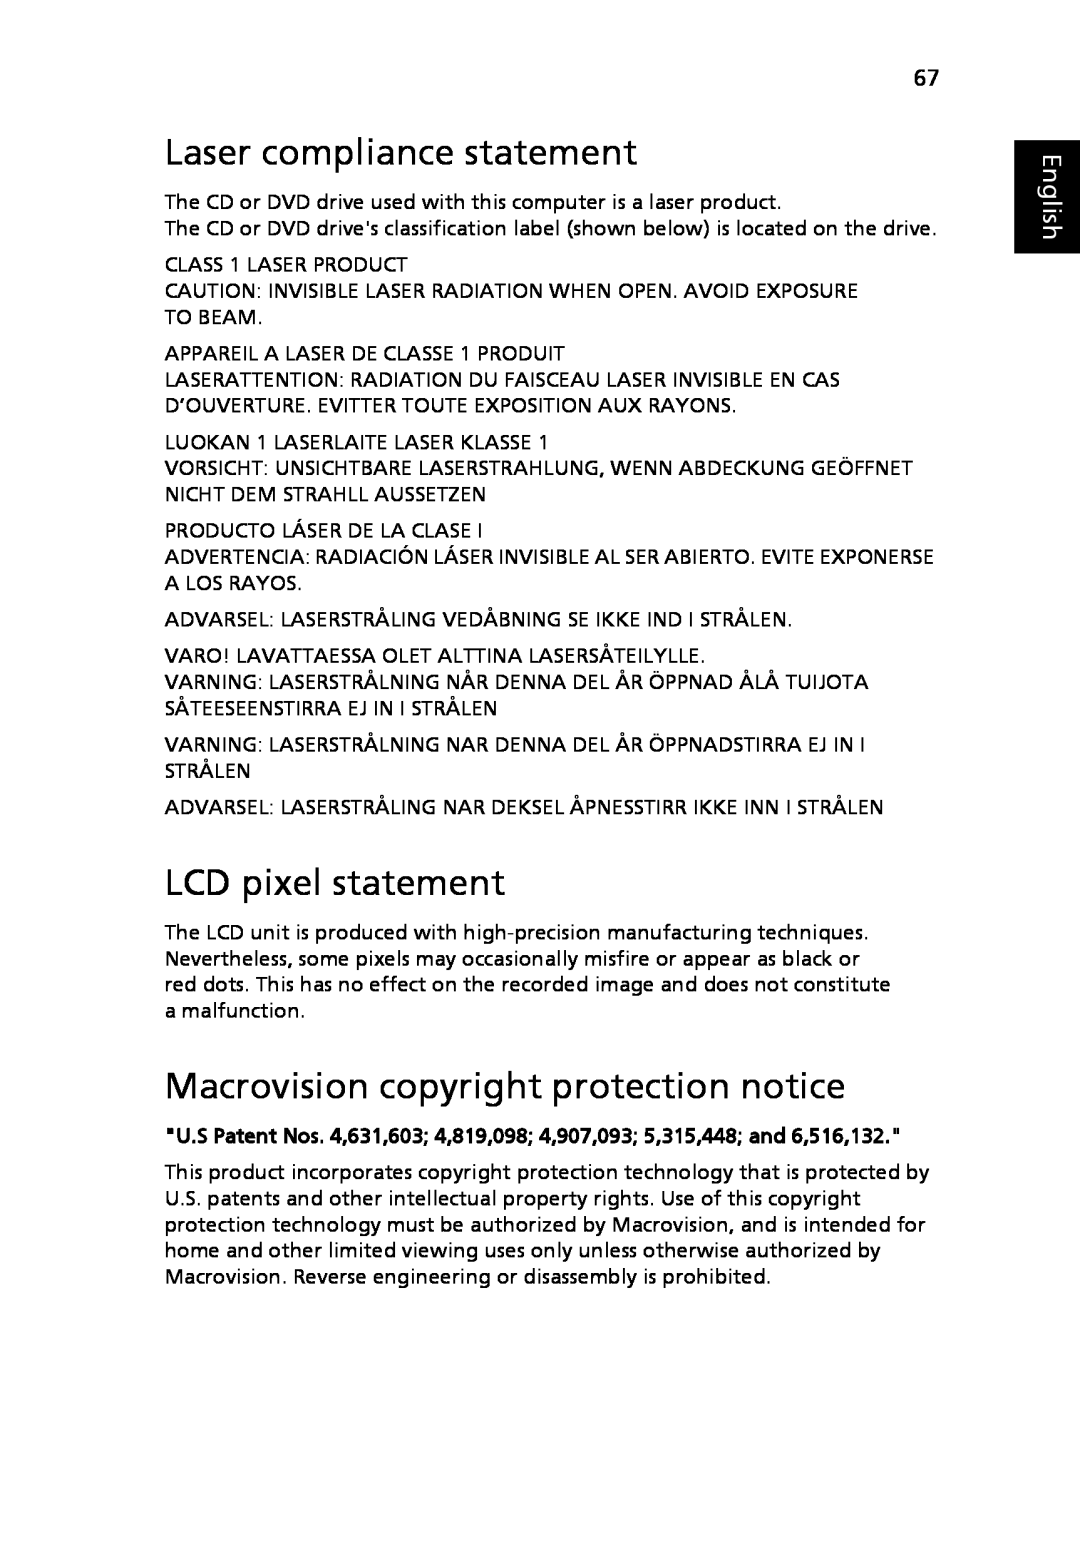 Acer 6492 Series, 6492G Laser compliance statement, LCD pixel statement, Macrovision copyright protection notice, English 